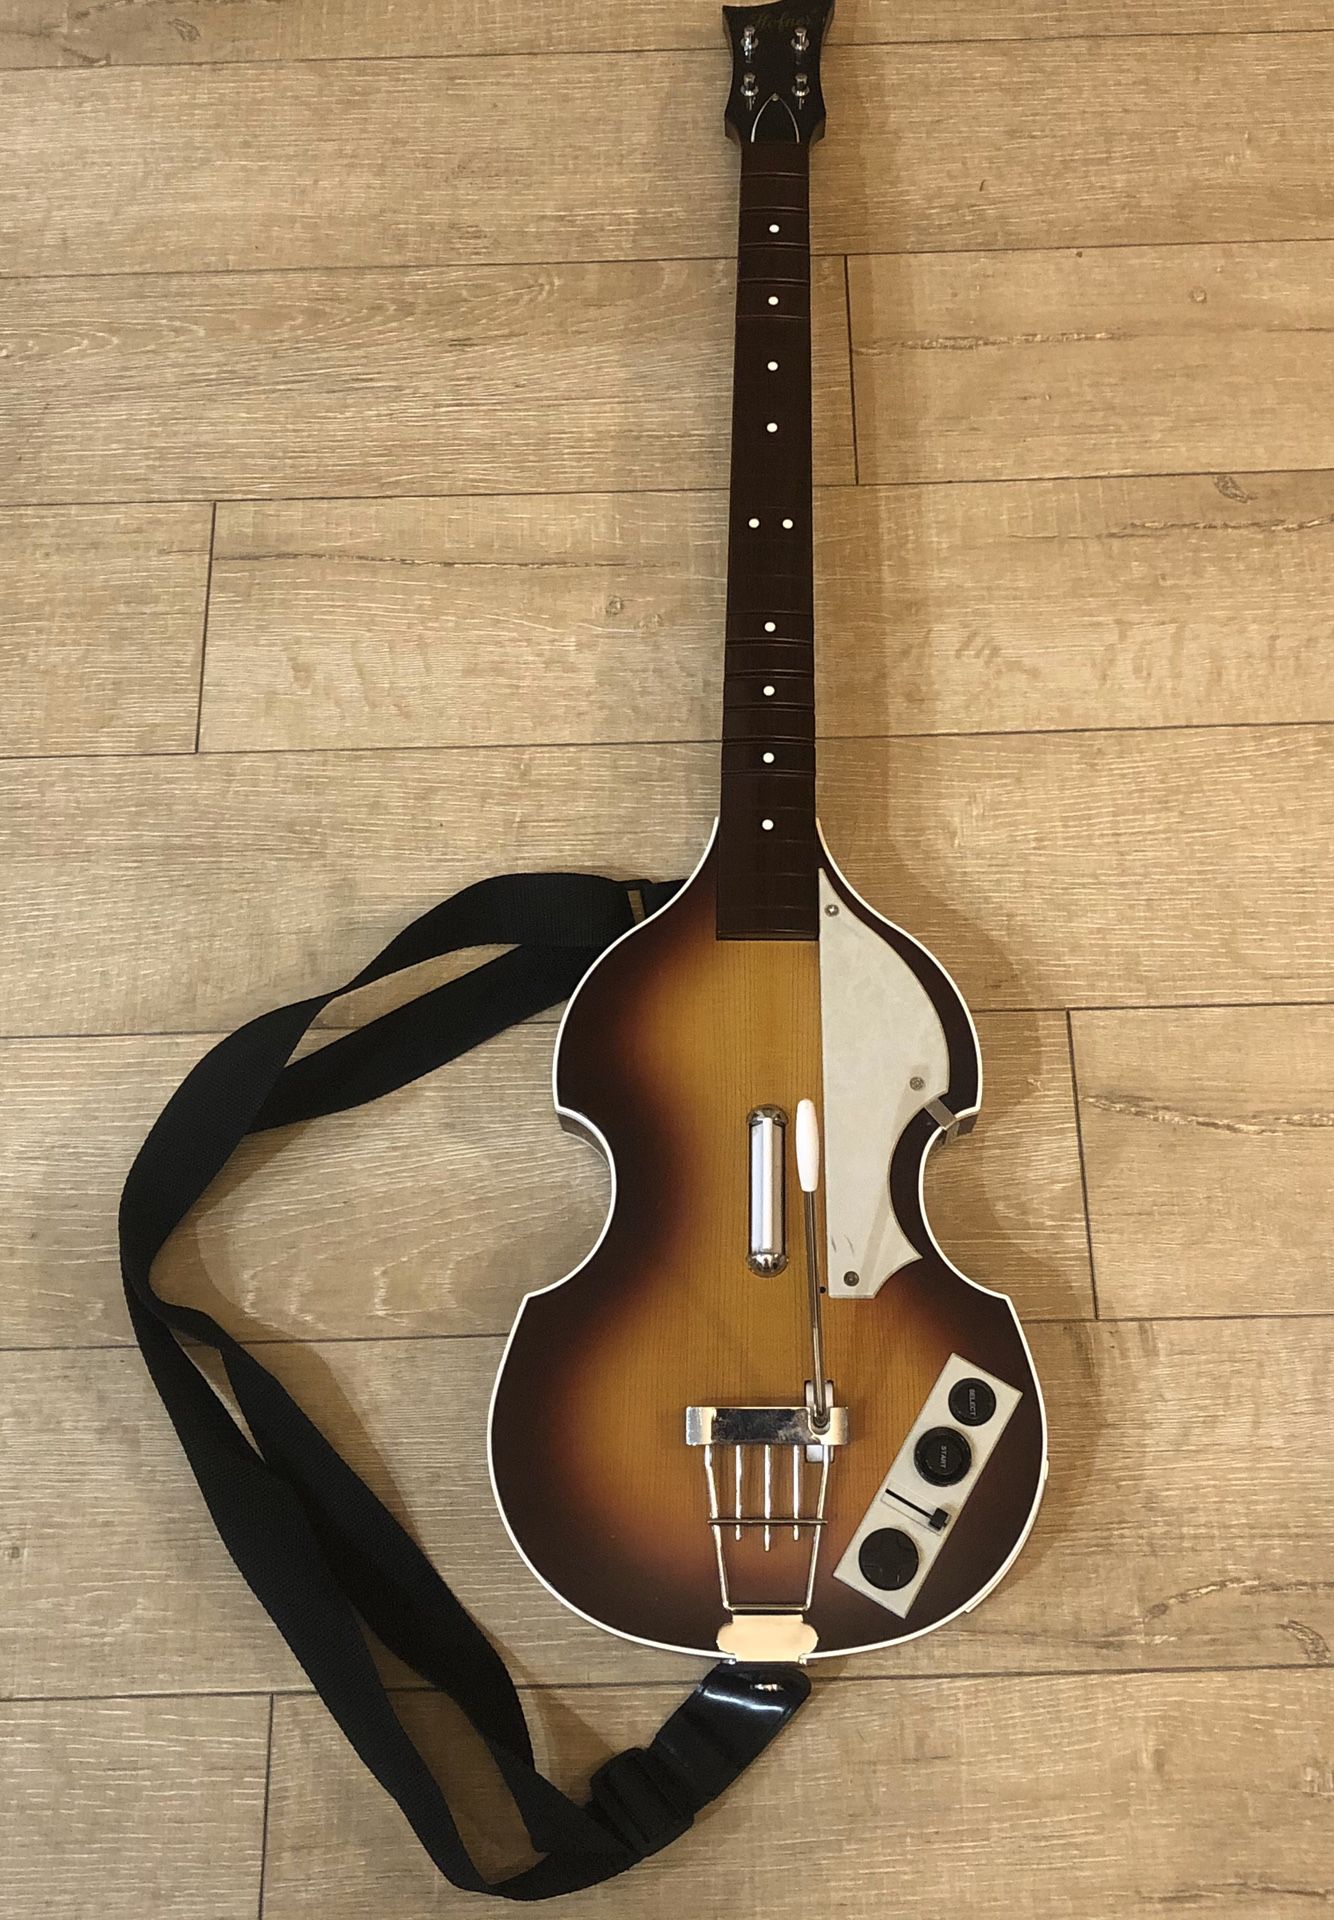 Beatles Hofner Rockband Model PSGTS3 Guitar Controller by Harmonix for Sony PS3 - No Dongle